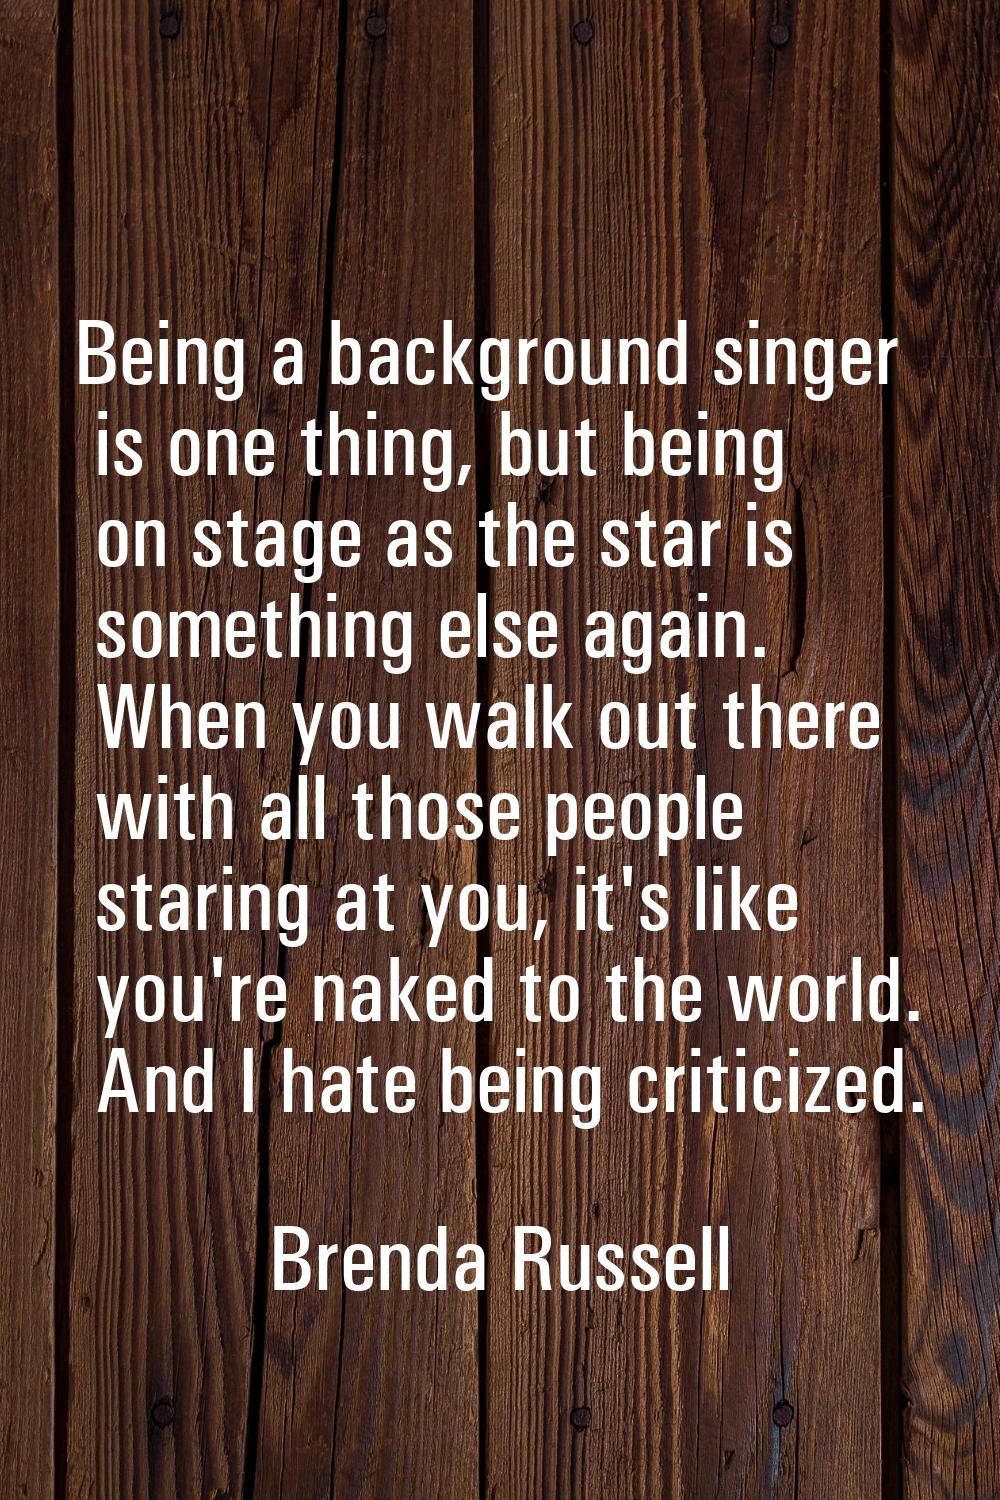 Being a background singer is one thing, but being on stage as the star is something else again. Whe